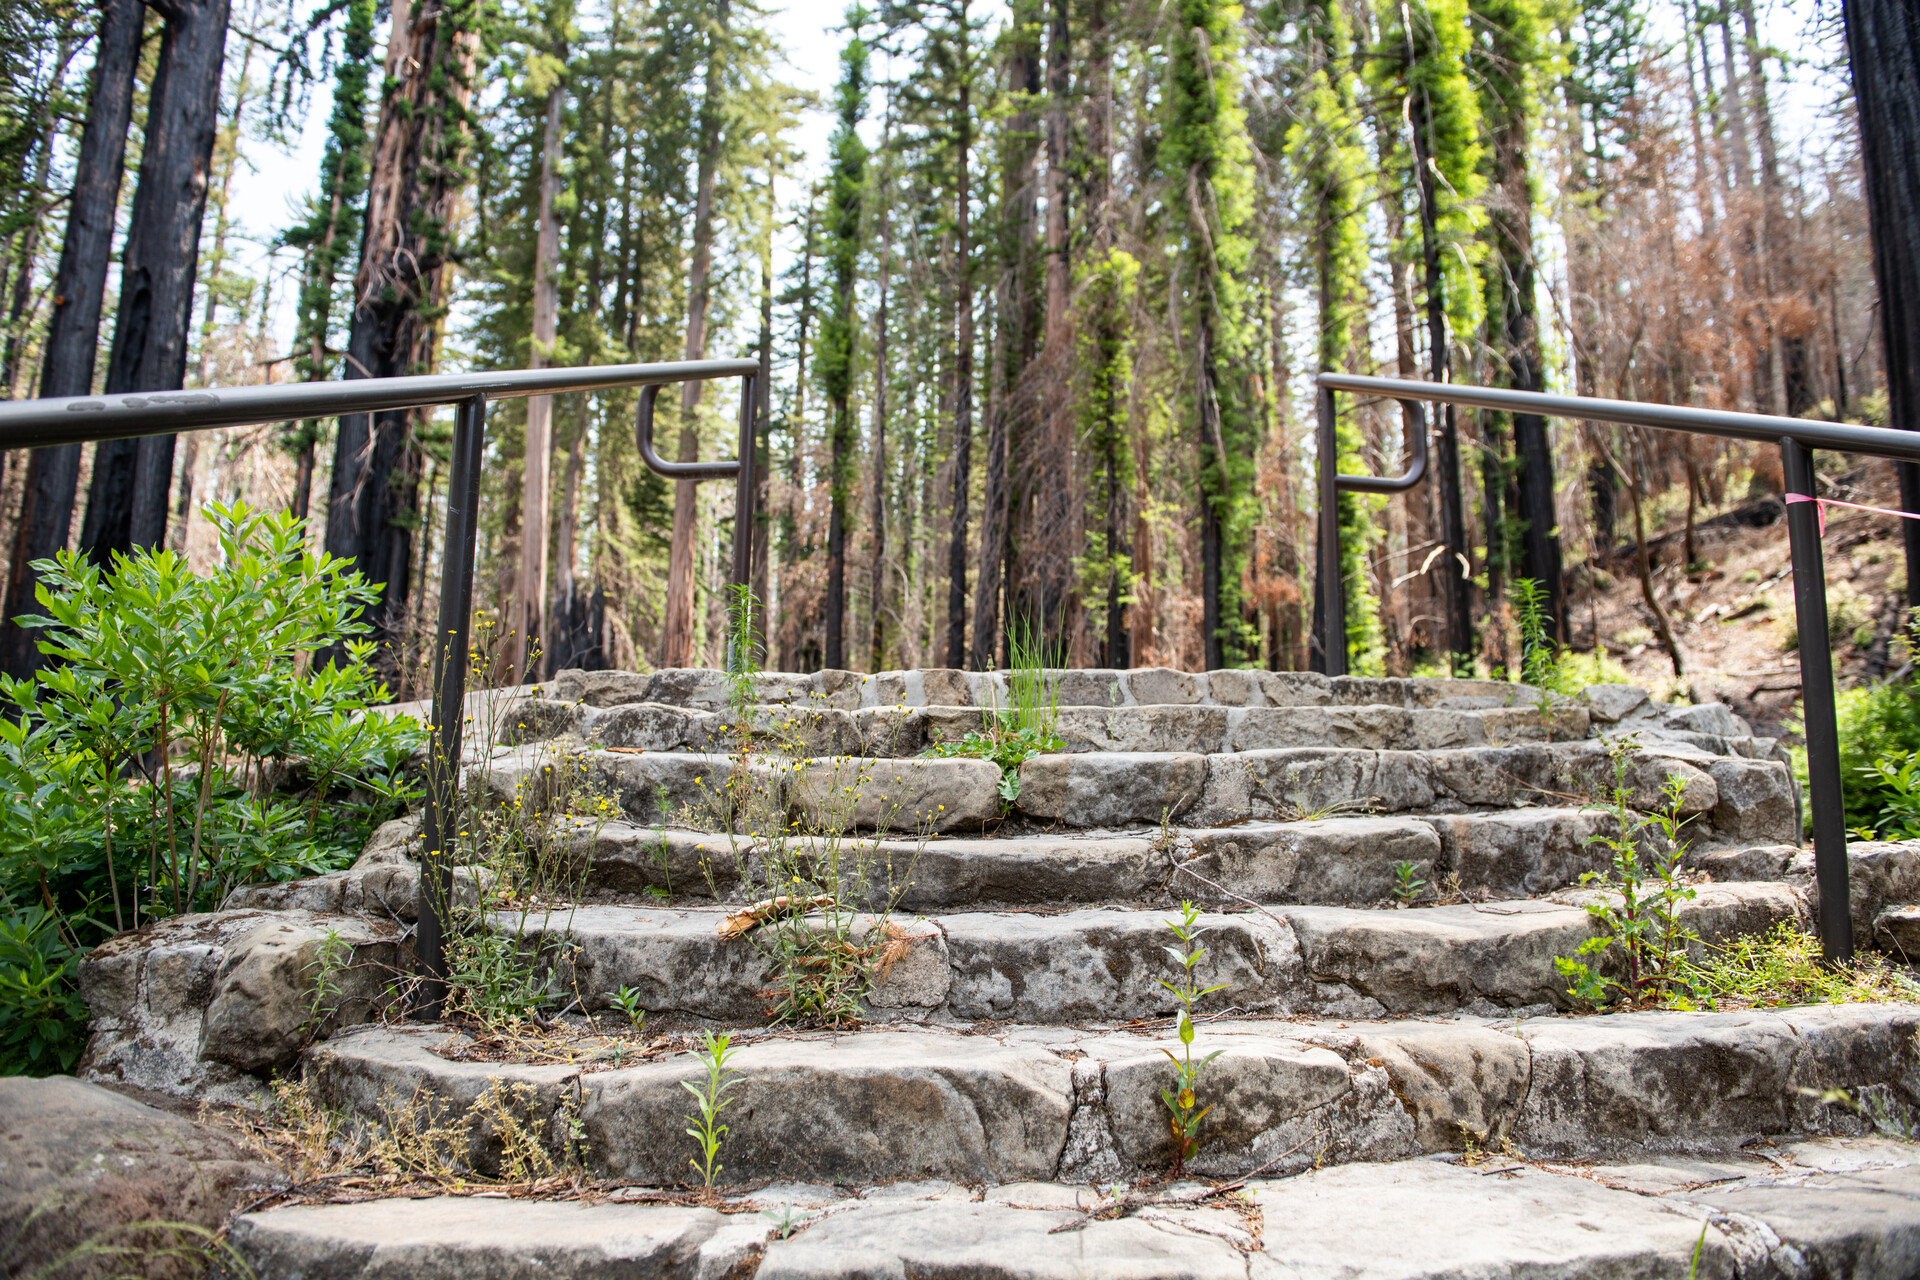 Grey-colored steps with railings on either side, shot from below, with redwoods behind them.